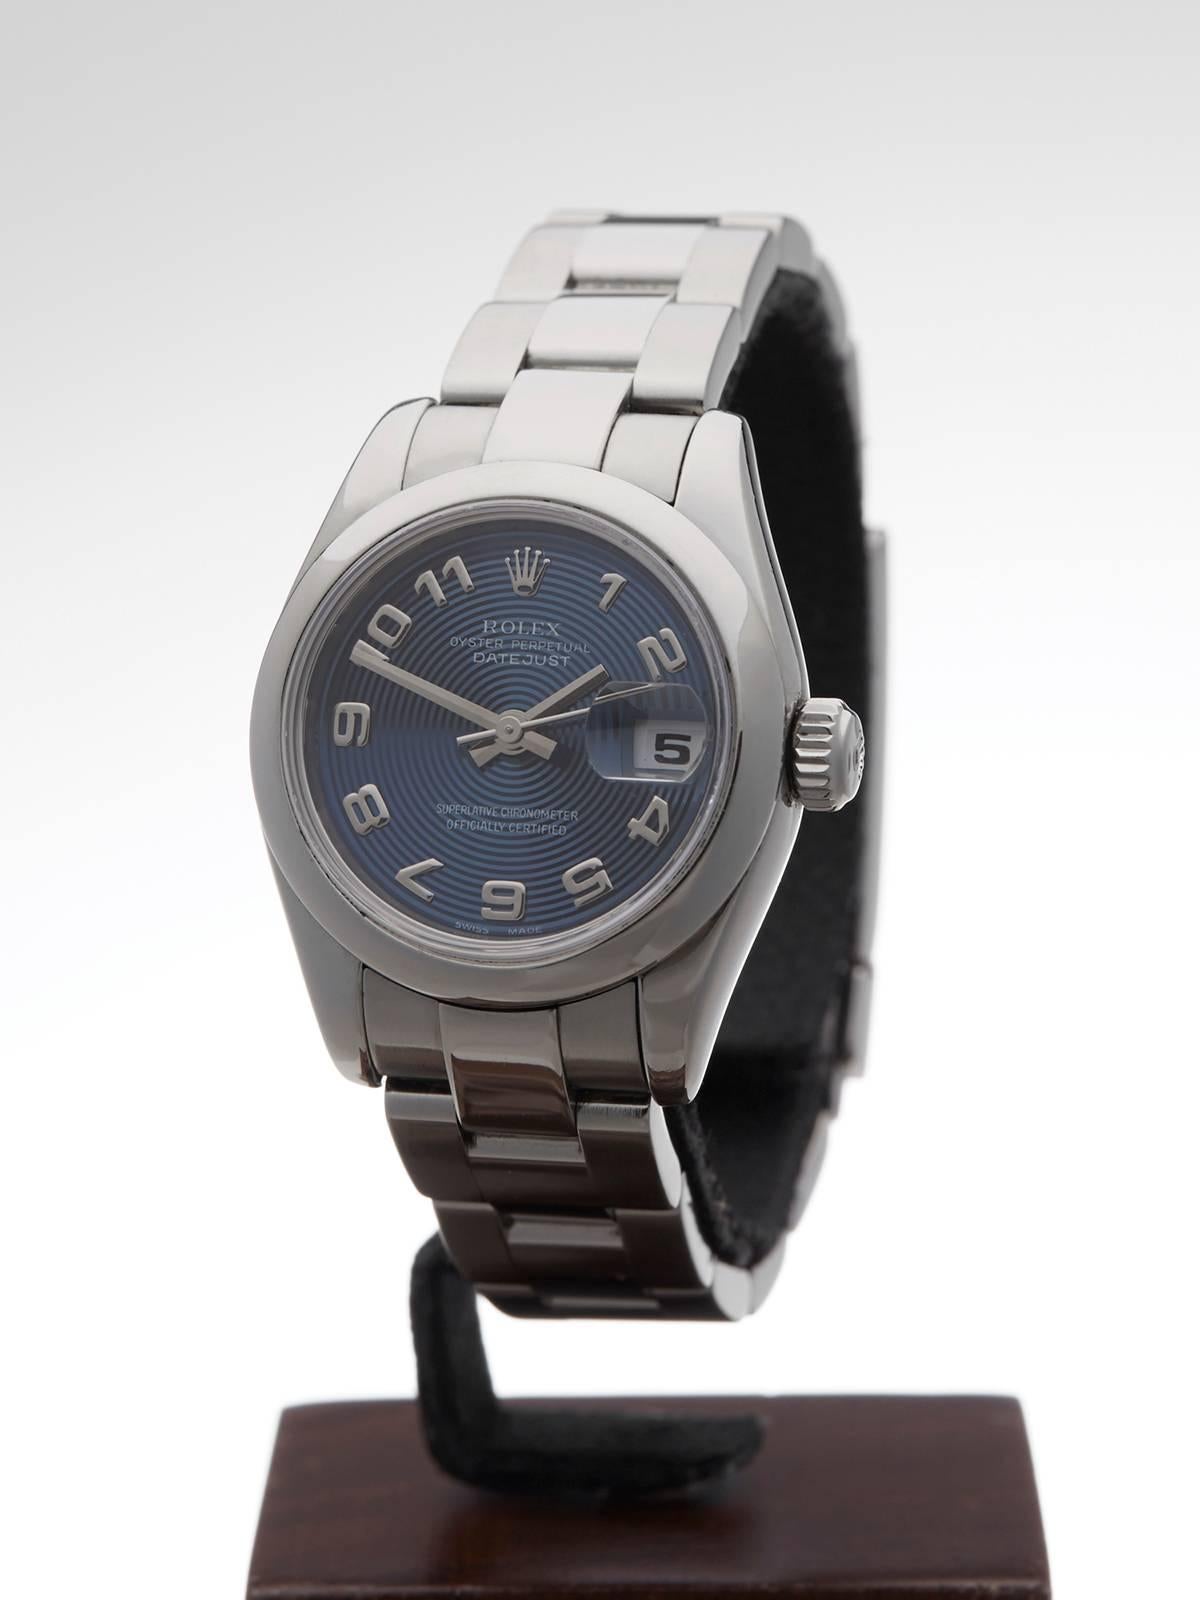 Ref: 	W3210
Model: 179160
Serial: D55****
Condition: 9 - Excellent condition
Age:  2005
Case Diameter:  26 mm
Case Size: 26mm
Box and Papers: Box Only
Movement: Automatic
Case: Stainless Steel
Dial: Blue Arabic
Bracelet: Stainless Steel Oyster
Strap